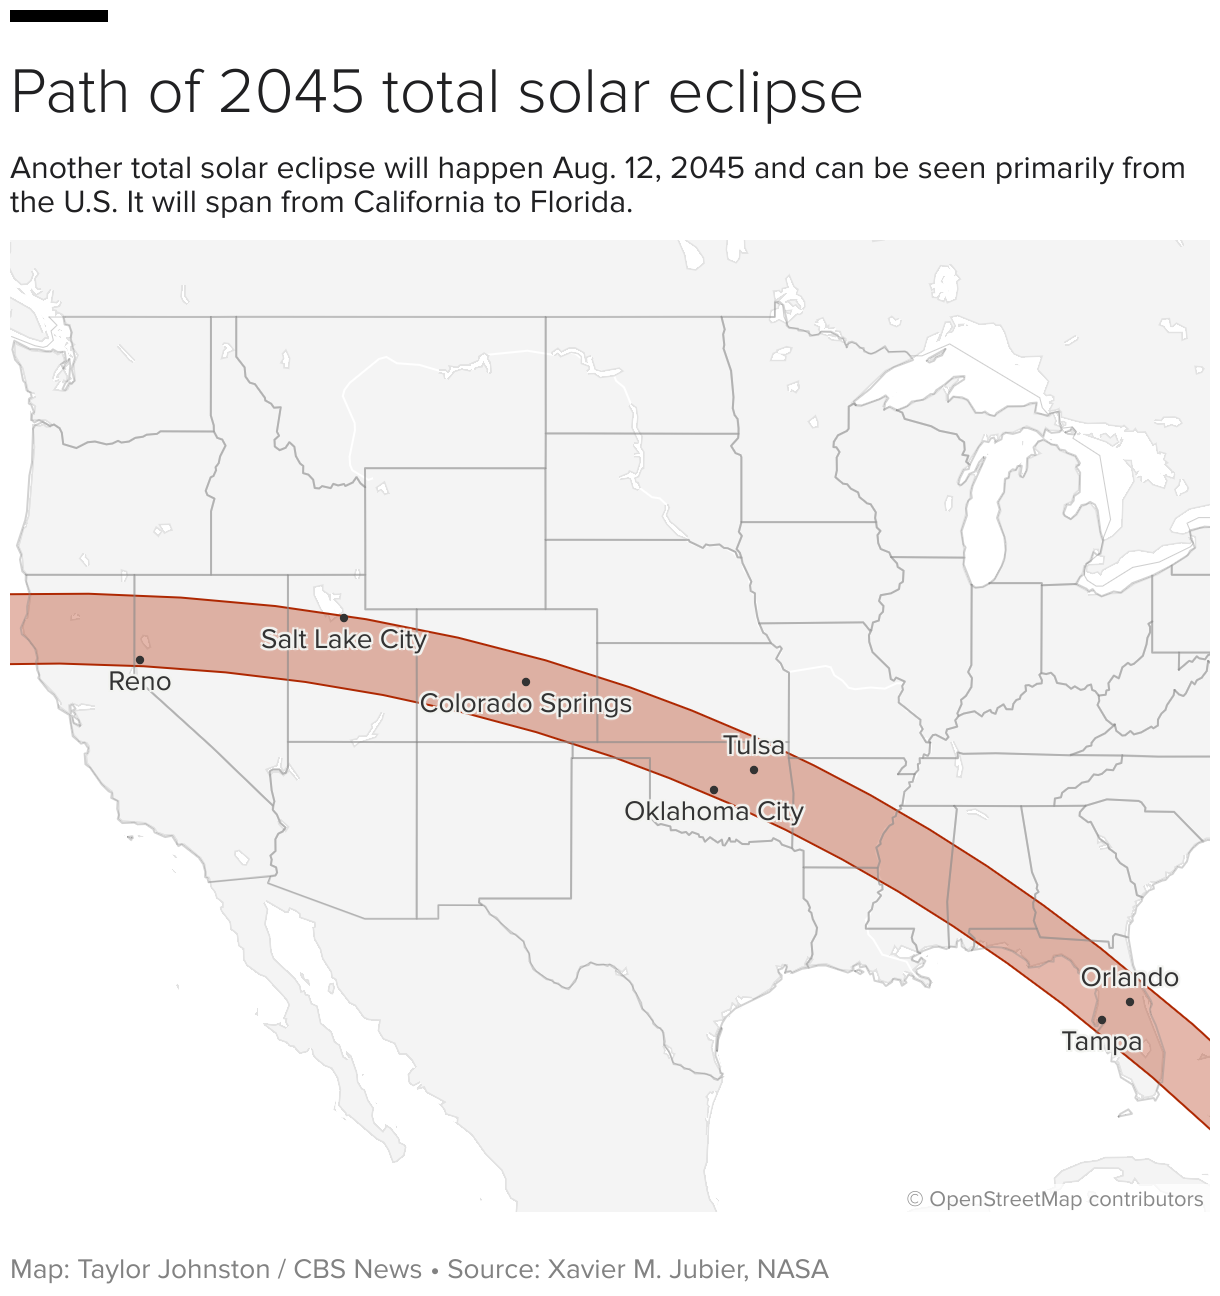 A map of the United States showing the path of the 2045 solar eclipse.